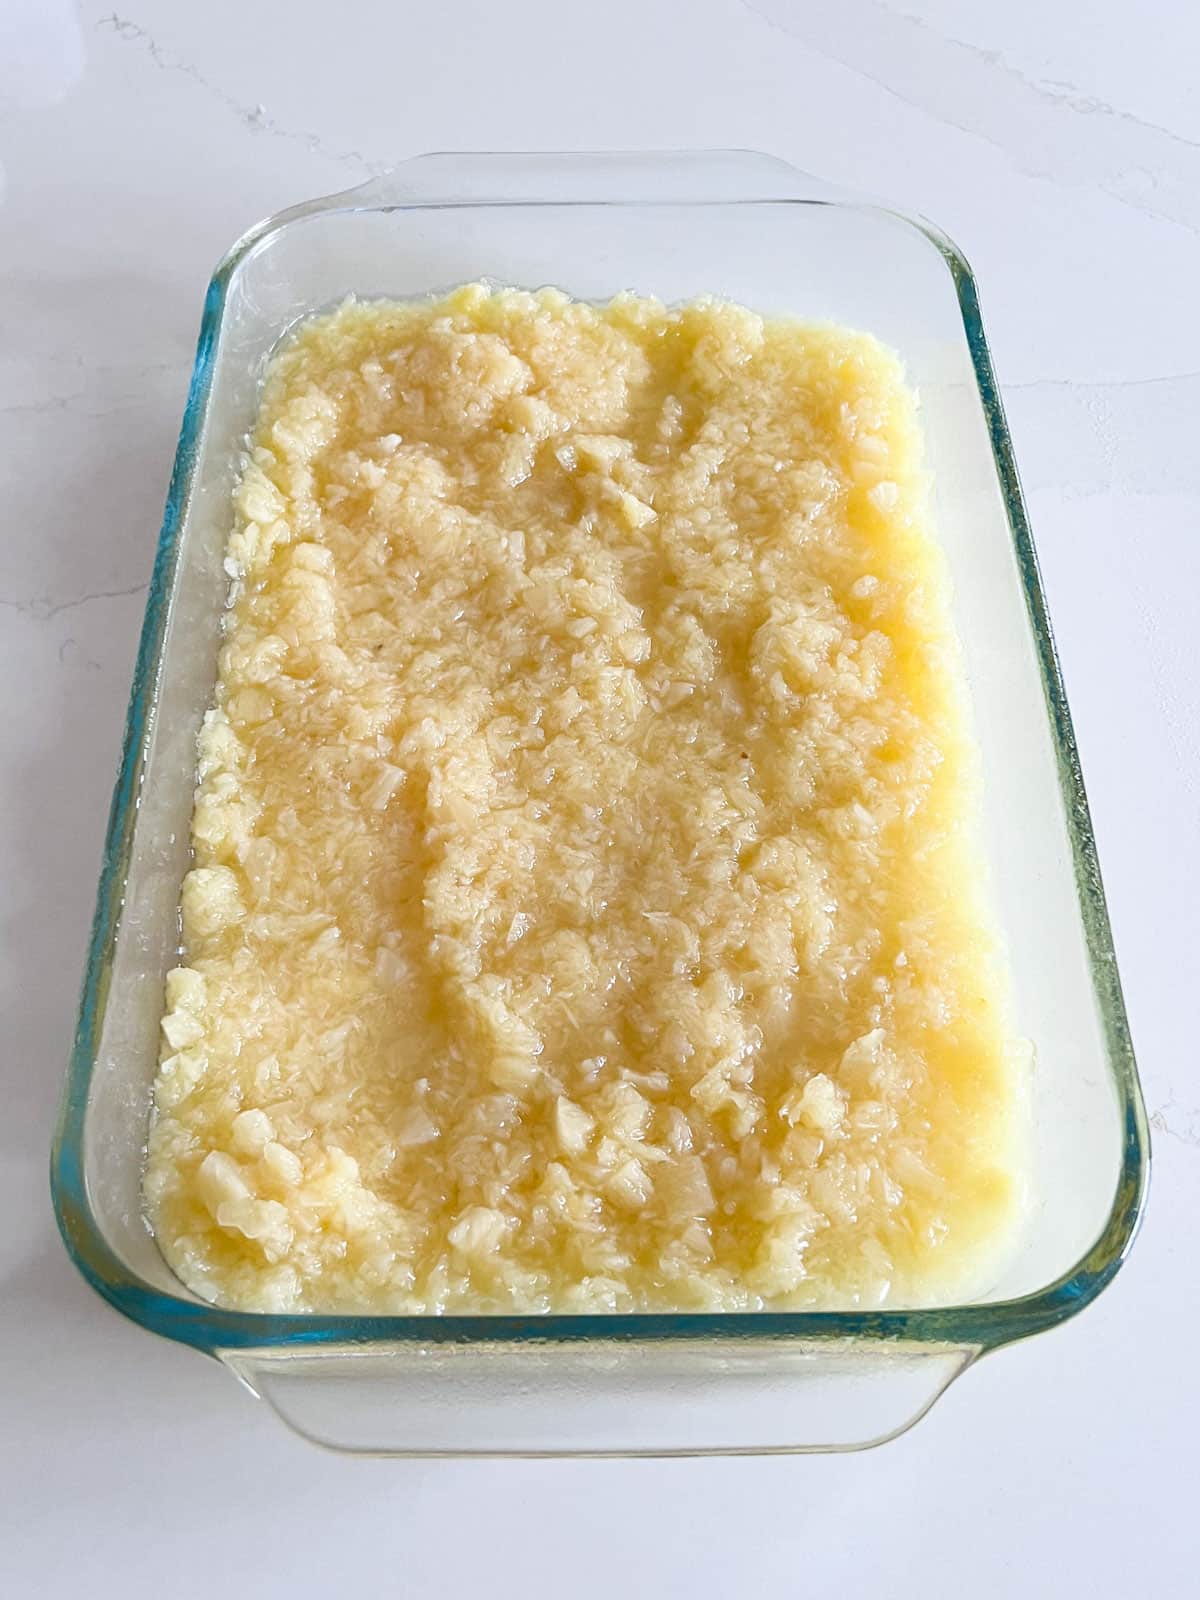 A clear glass baking pan with crushed pineapple spread along the bottom of it.